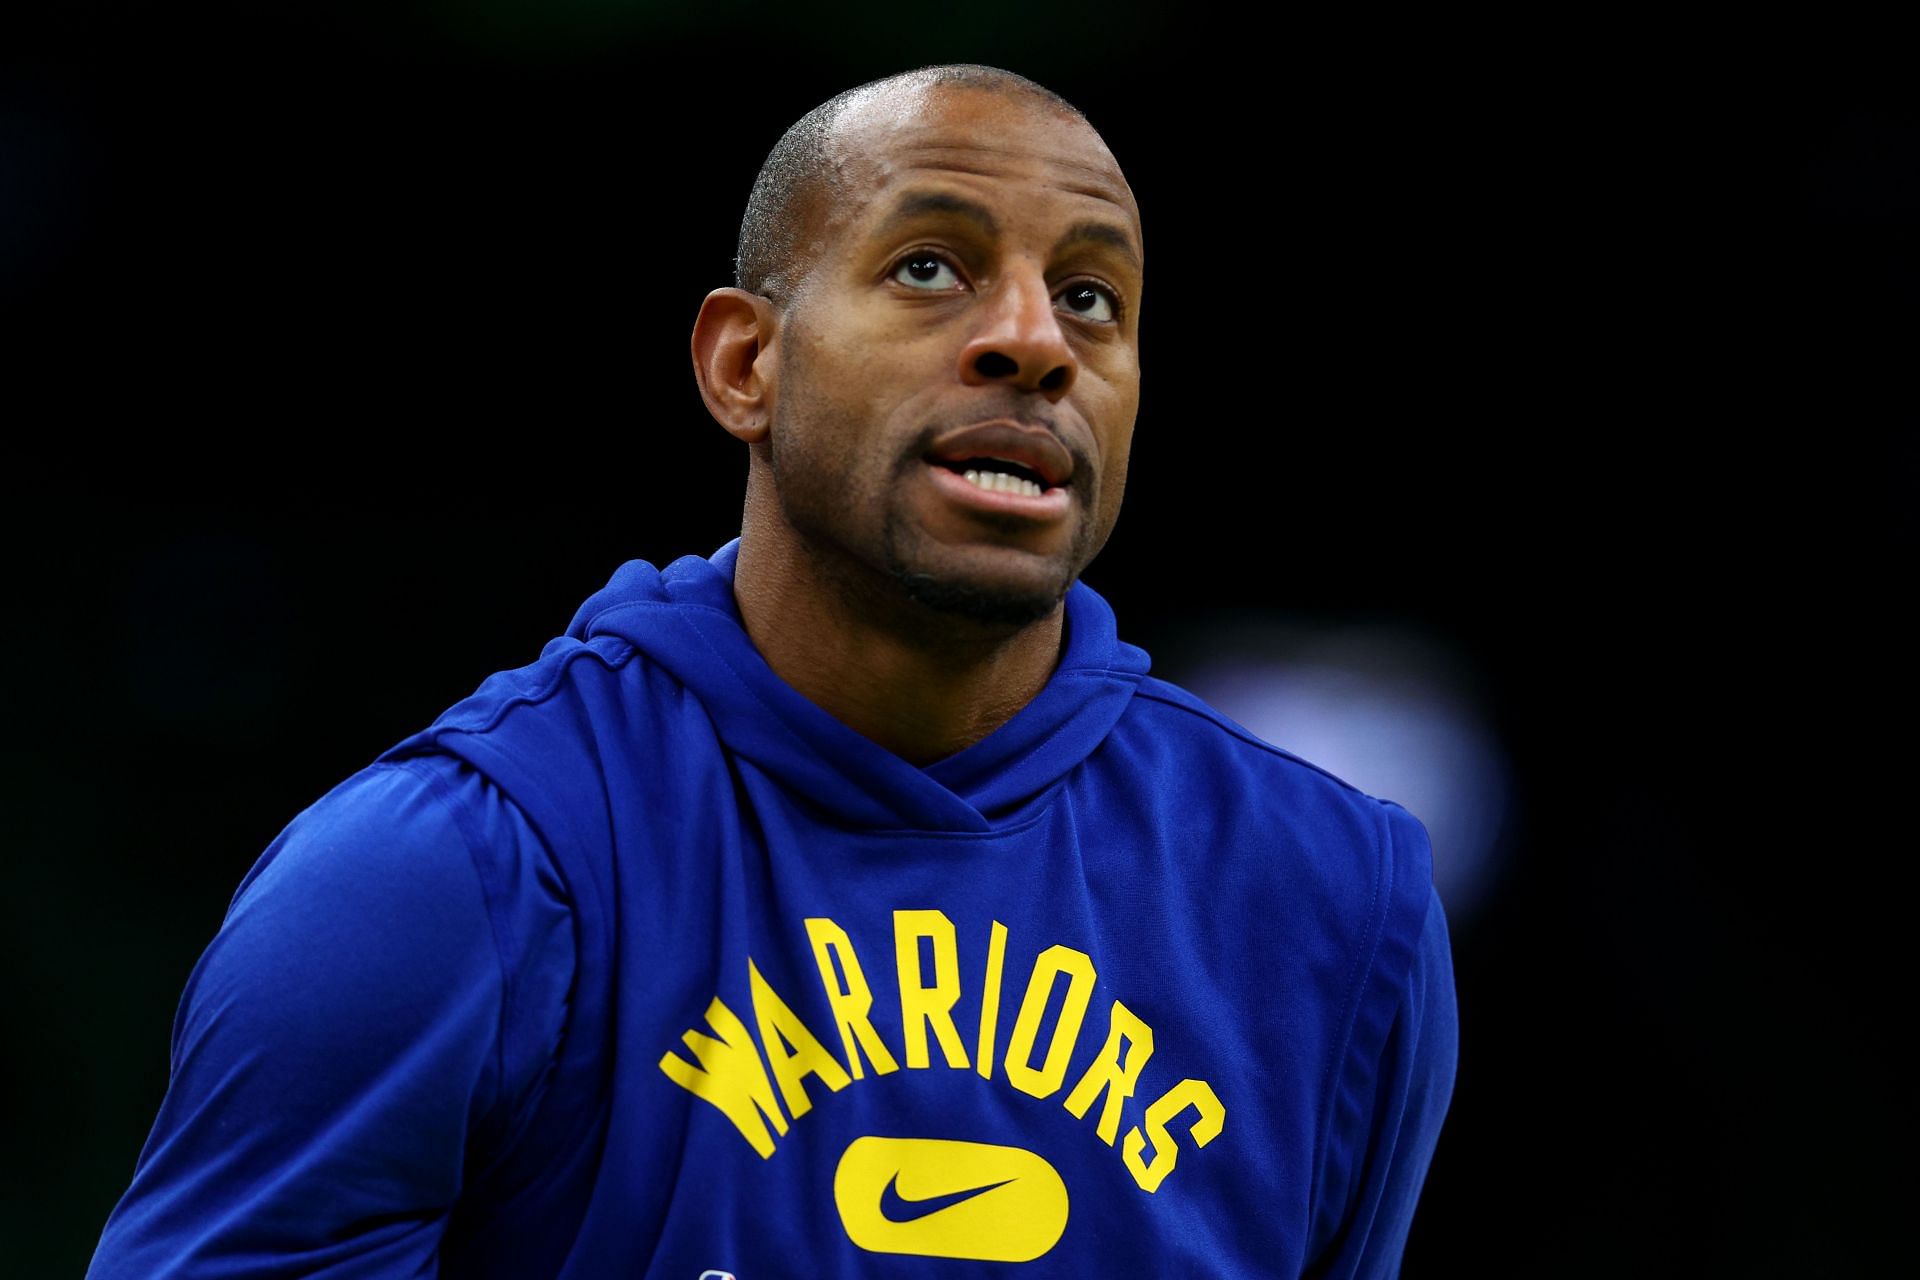 Andre Iguodala warms up with the Golden State Warriors